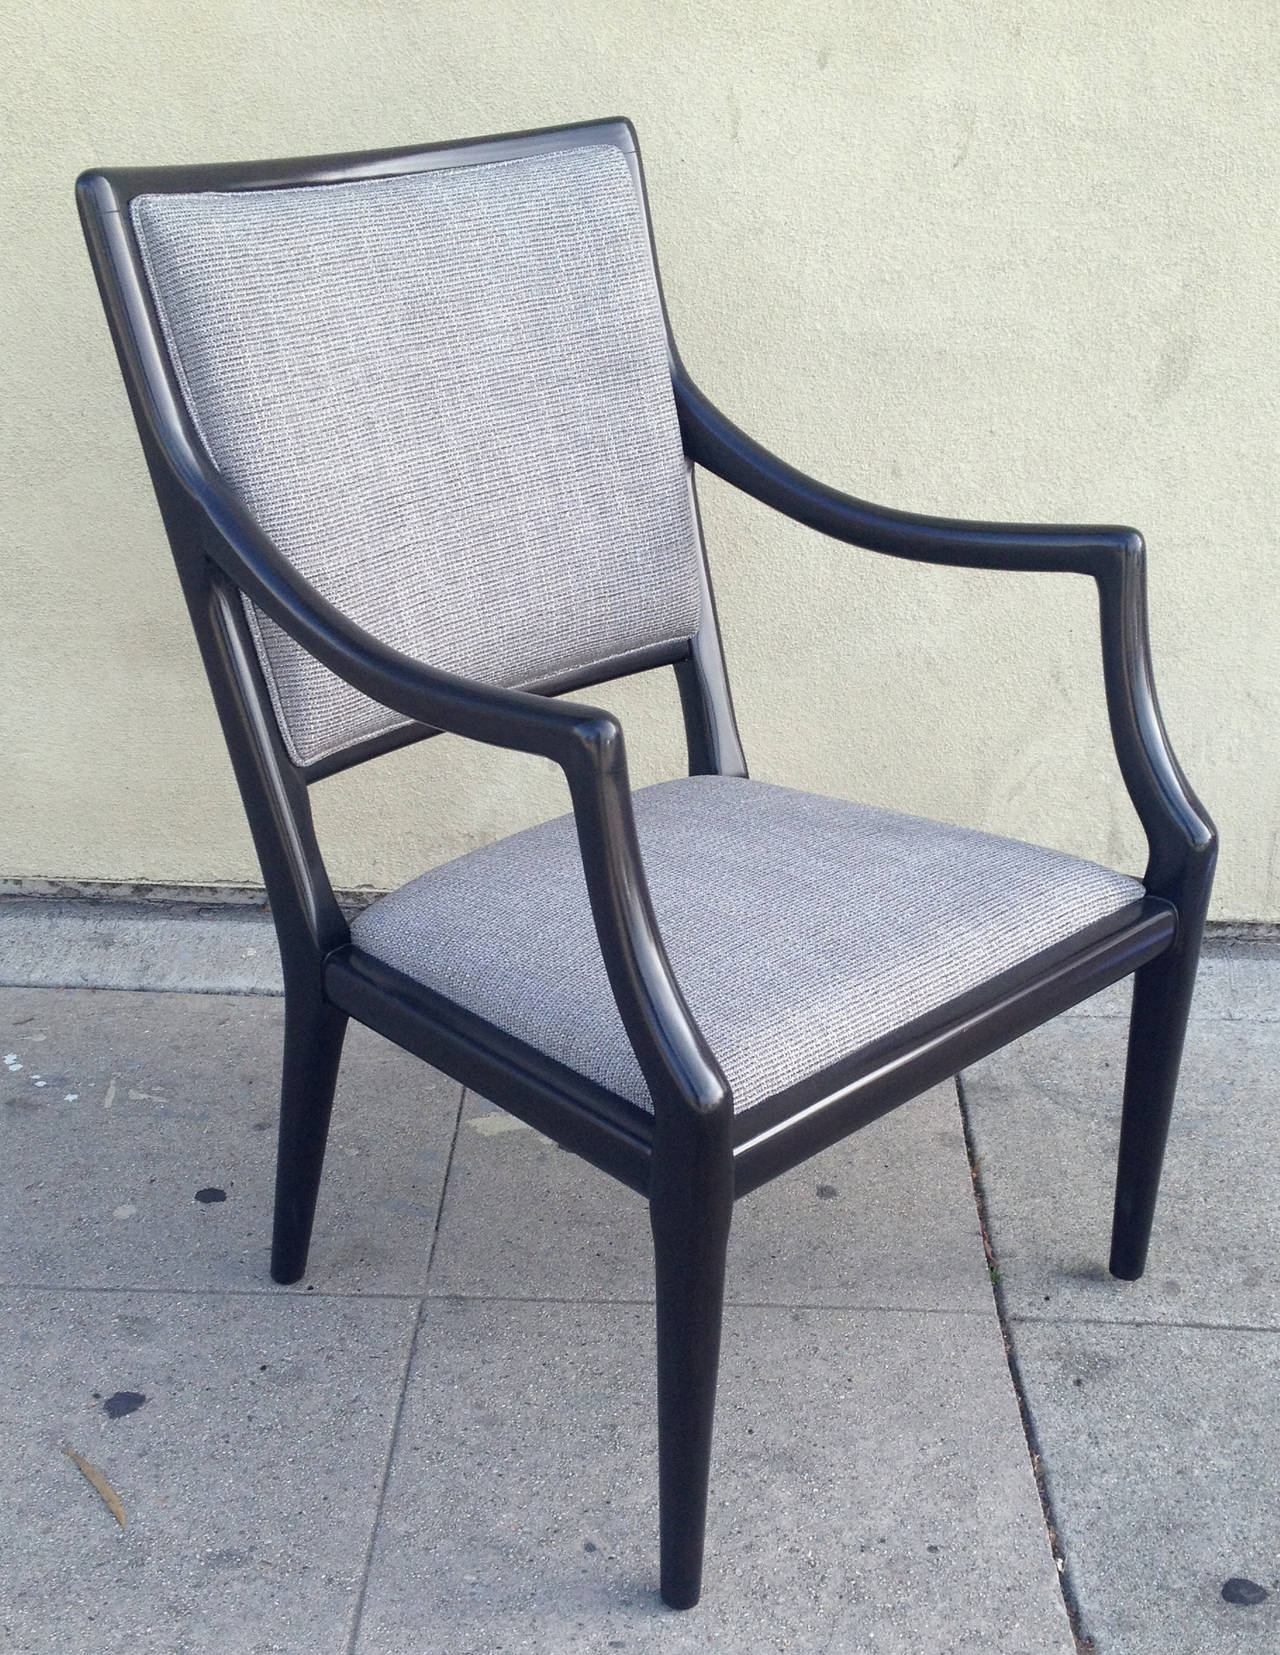 20th Century Pair of Armchairs with Sculptural Frame by Jamestown Lounge Co.